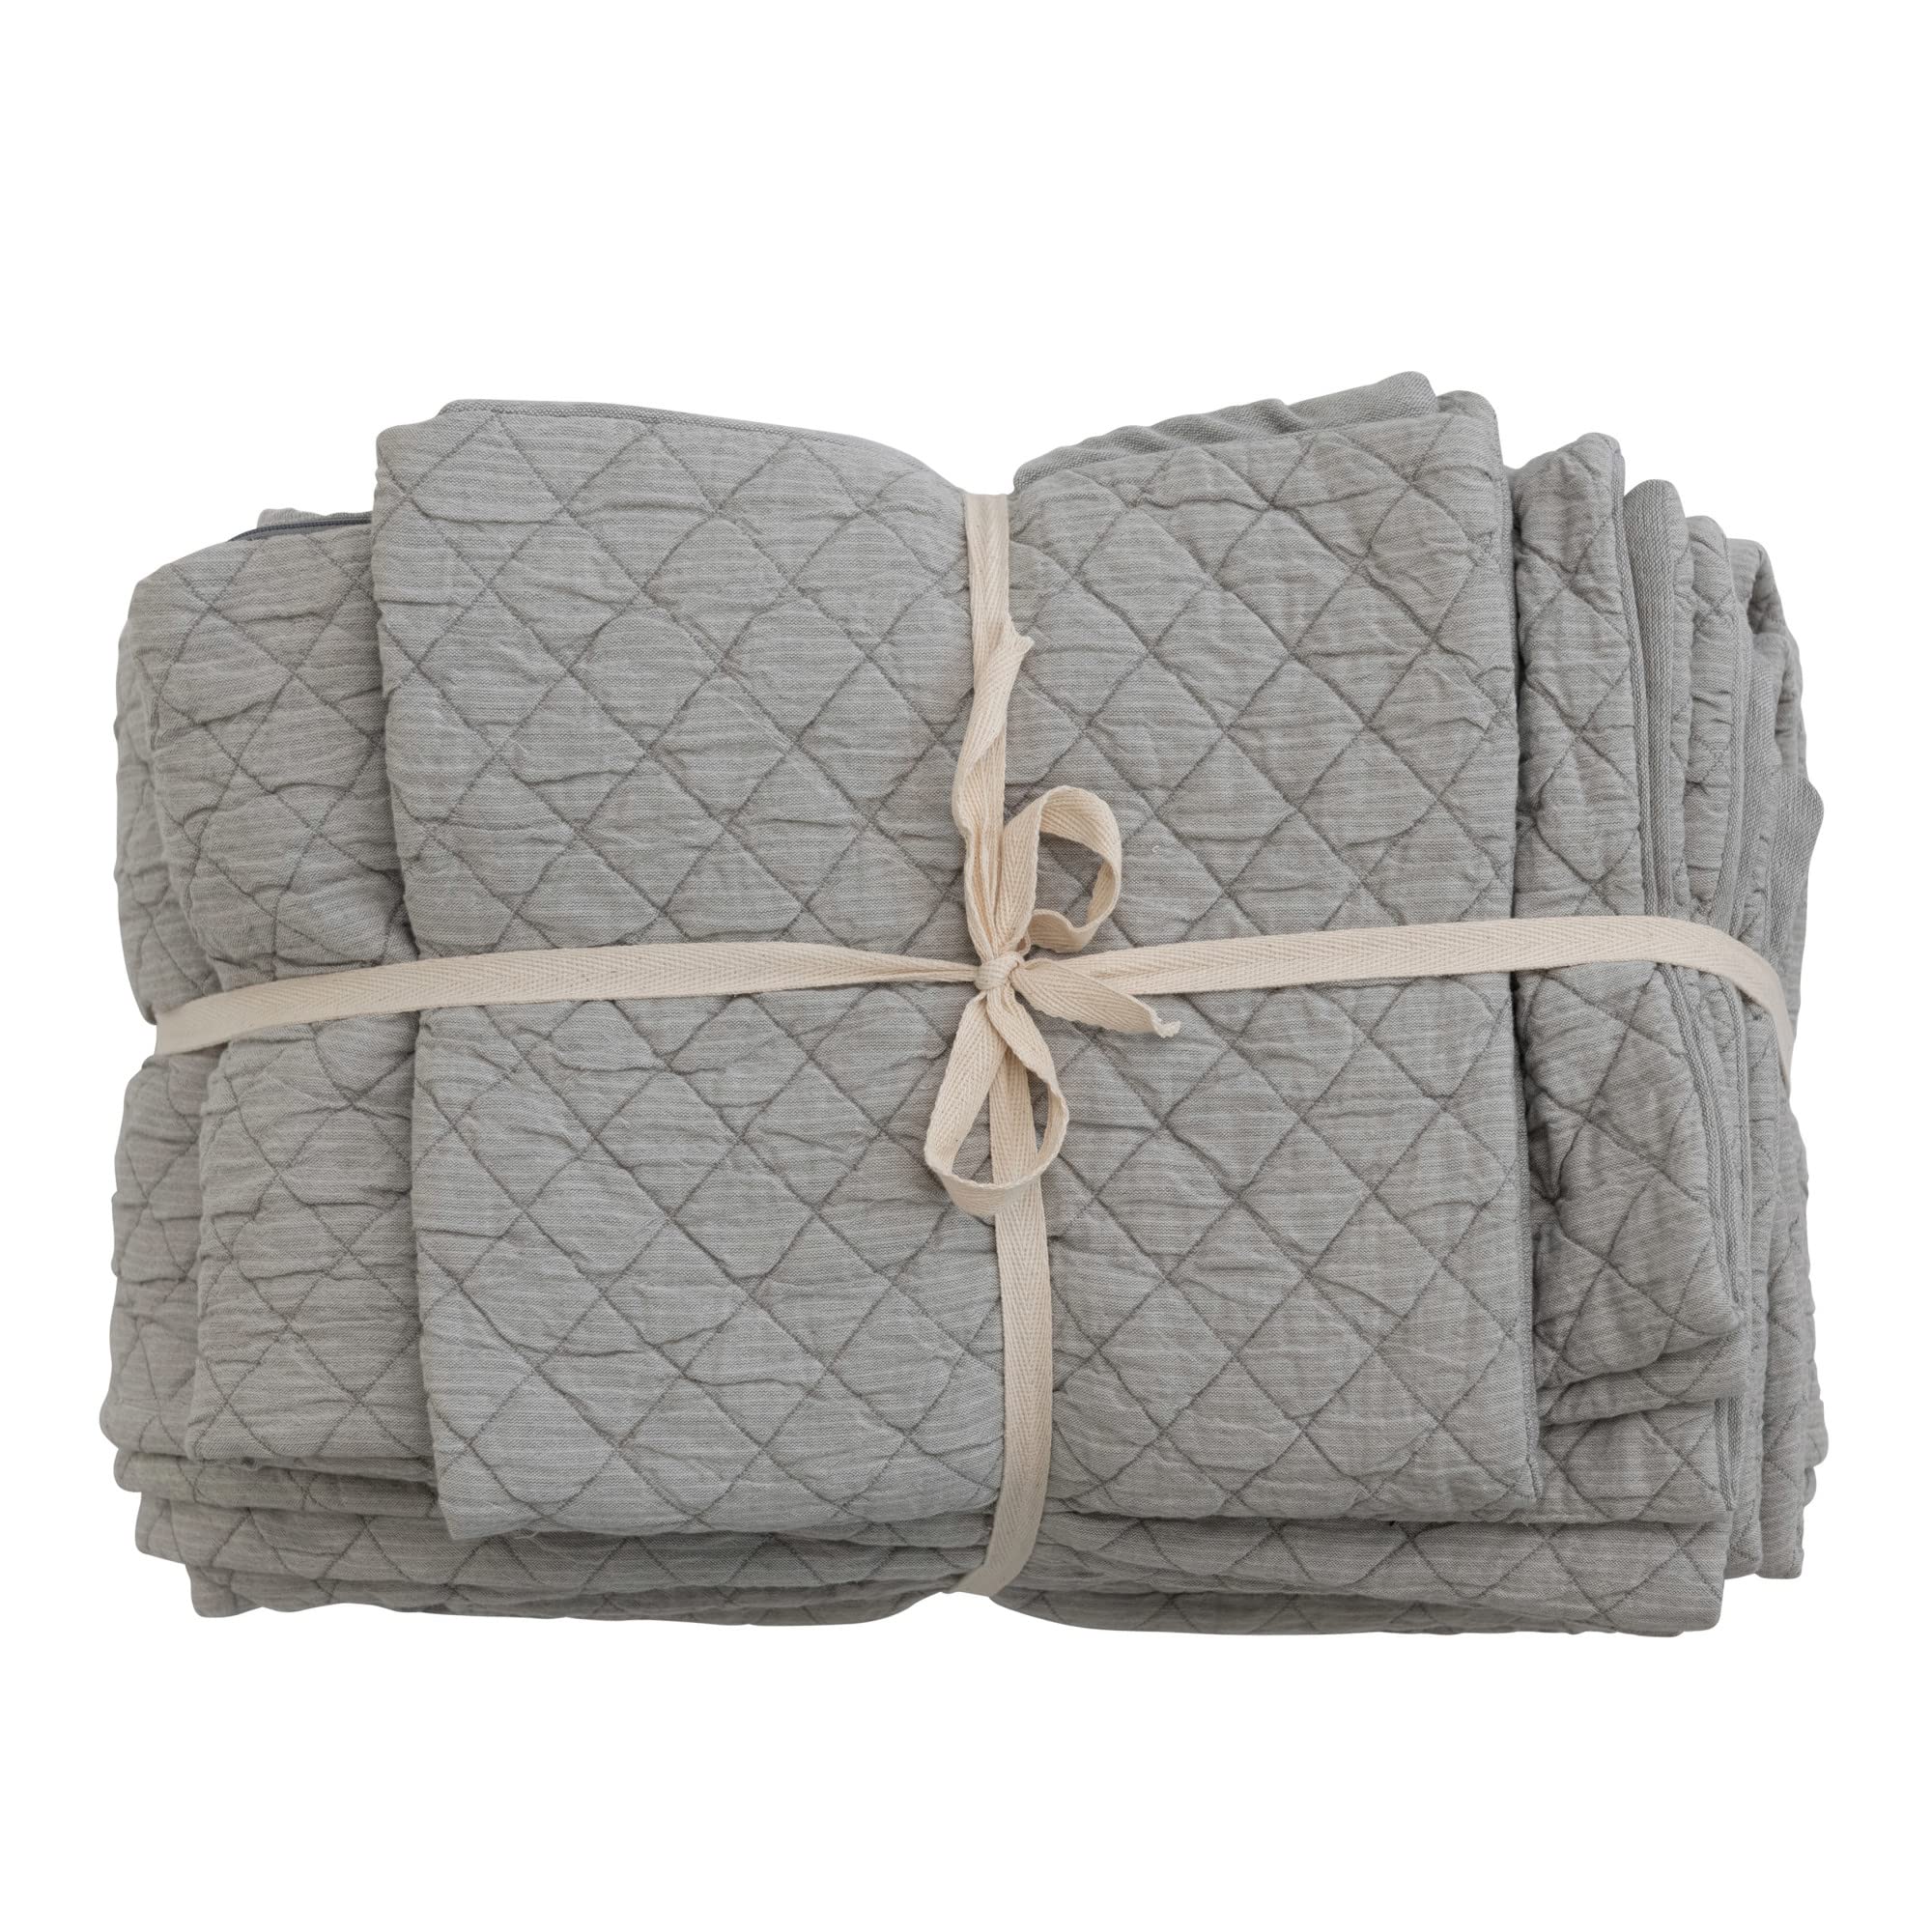 Creative Co-Op Queen Woven Cotton Quilted Jacquard Cover with 2 Standard Shams Set of 3 Grey Textiles Bedding 102 L x 90